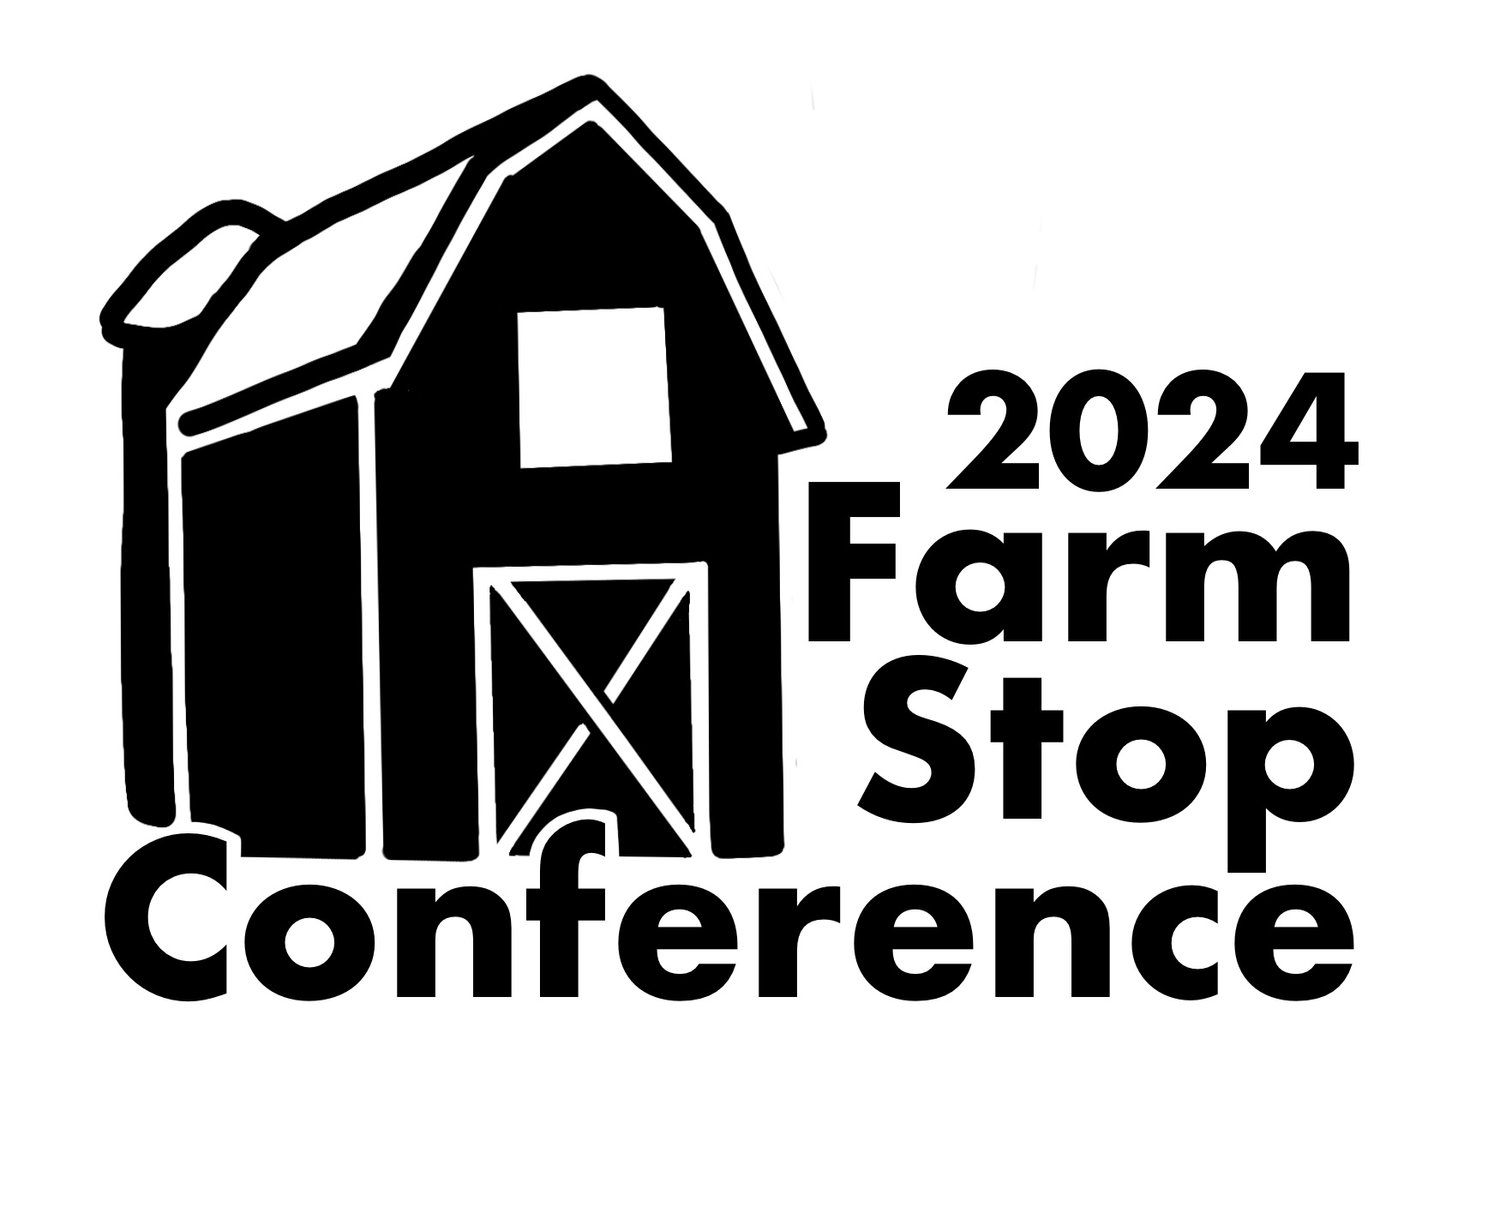 Farm Stop Conference Central